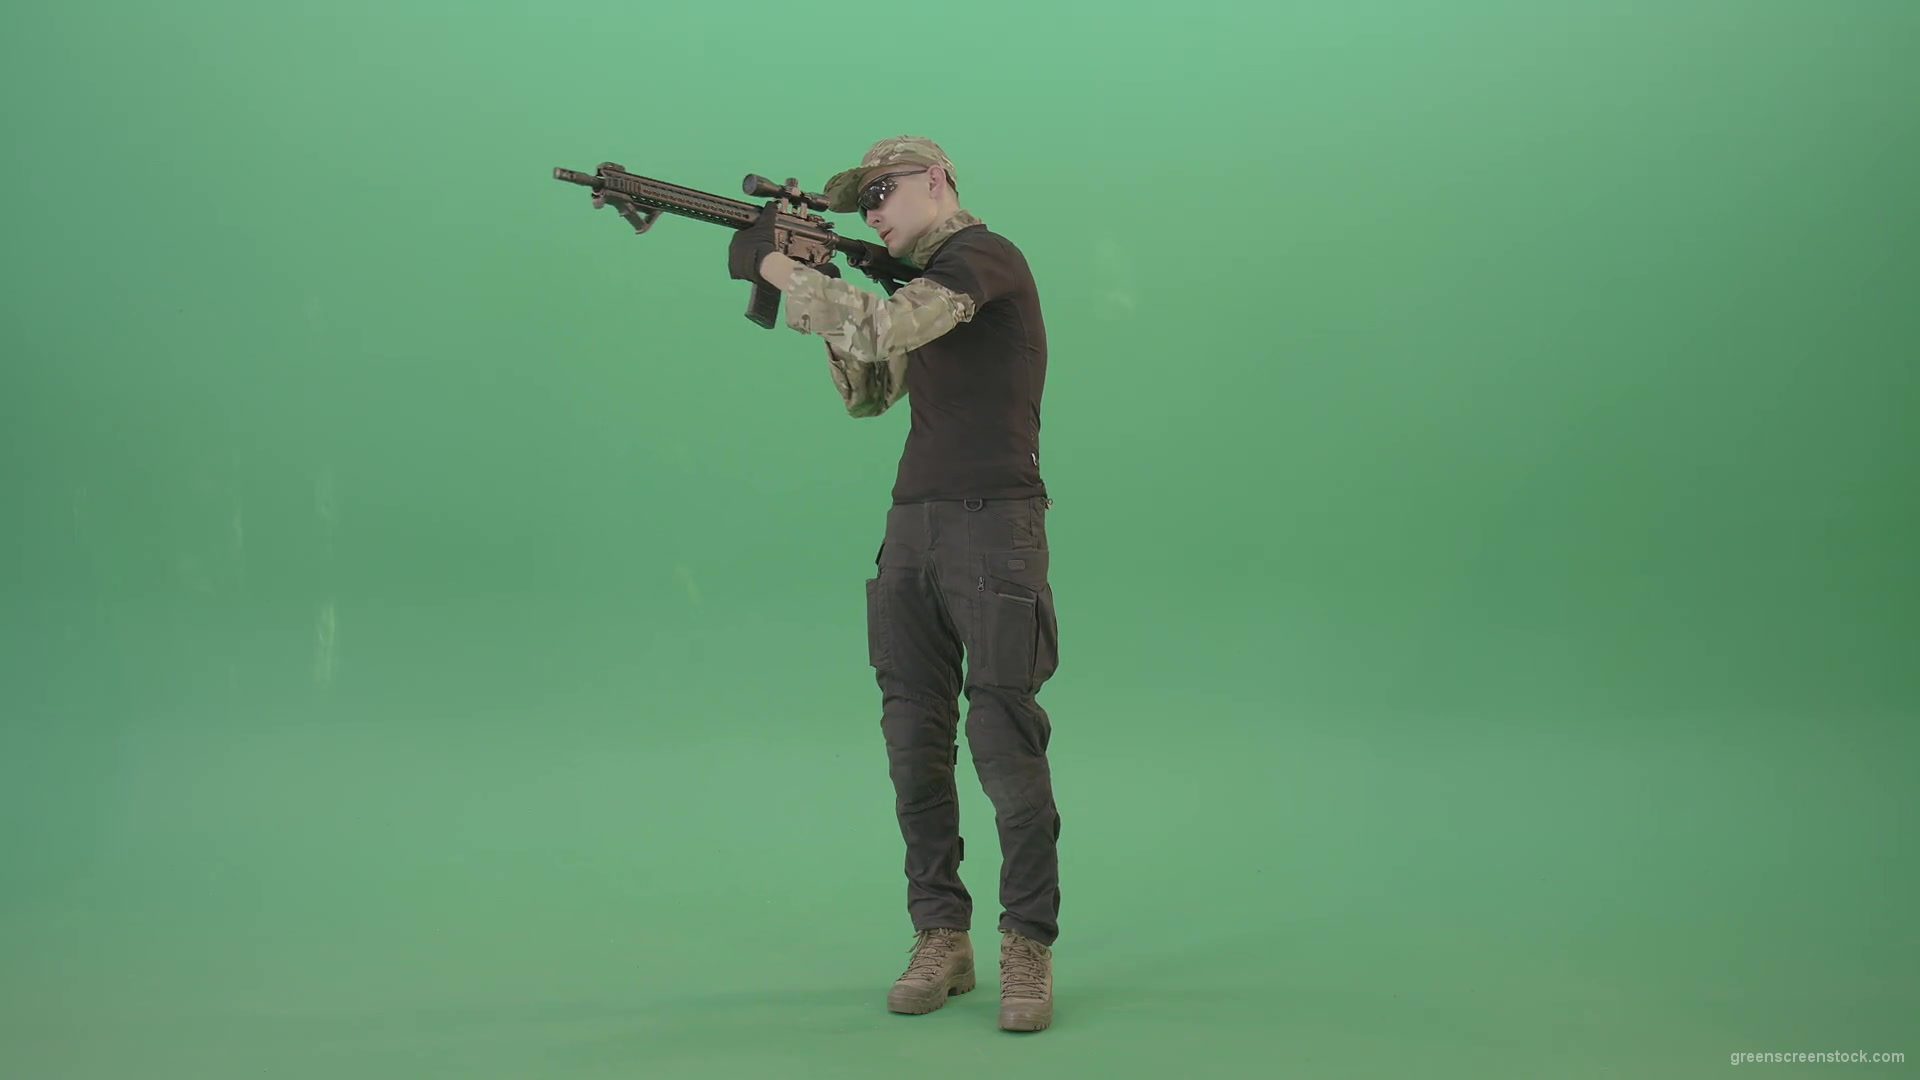 Man-in-Military-uniform-shooting-with-Army-machine-gun-isolated-on-Green-Screen-4K-Video-Footage-1920_002 Green Screen Stock